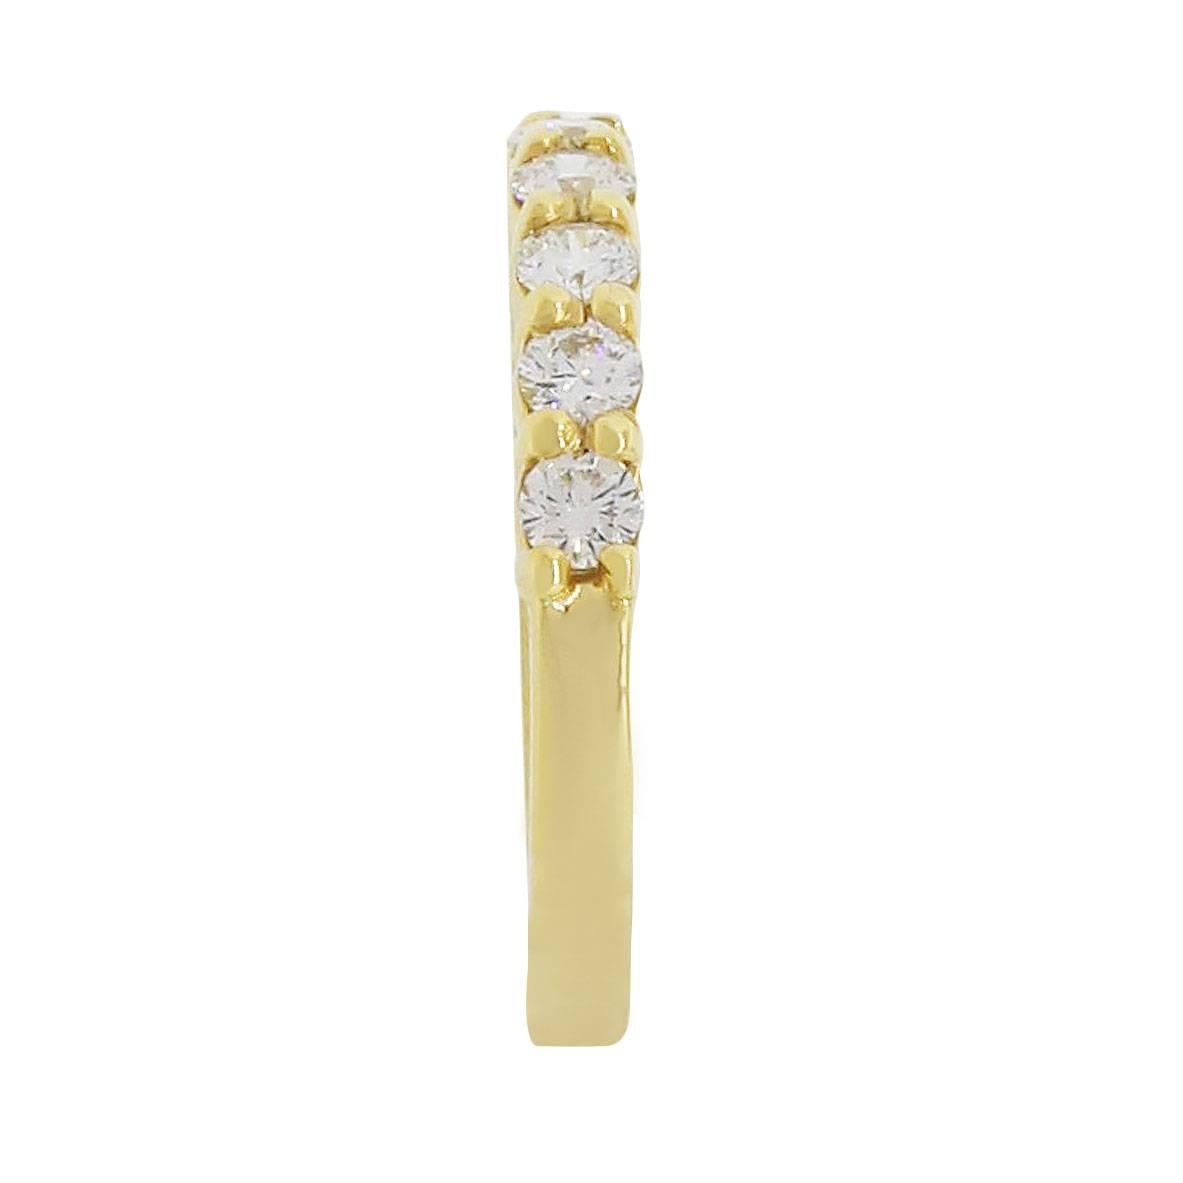 Material: 14k yellow gold
Diamond Details: Approximately 3.19ctw of round brilliant diamonds. Diamonds are H/J in color and SI in clarity
Ring Size: 6
Ring Measurements: 0.78″ x 0.20″ x 0.78
Total Weight: 5.1g (3.3dwt)
SKU: A30311472